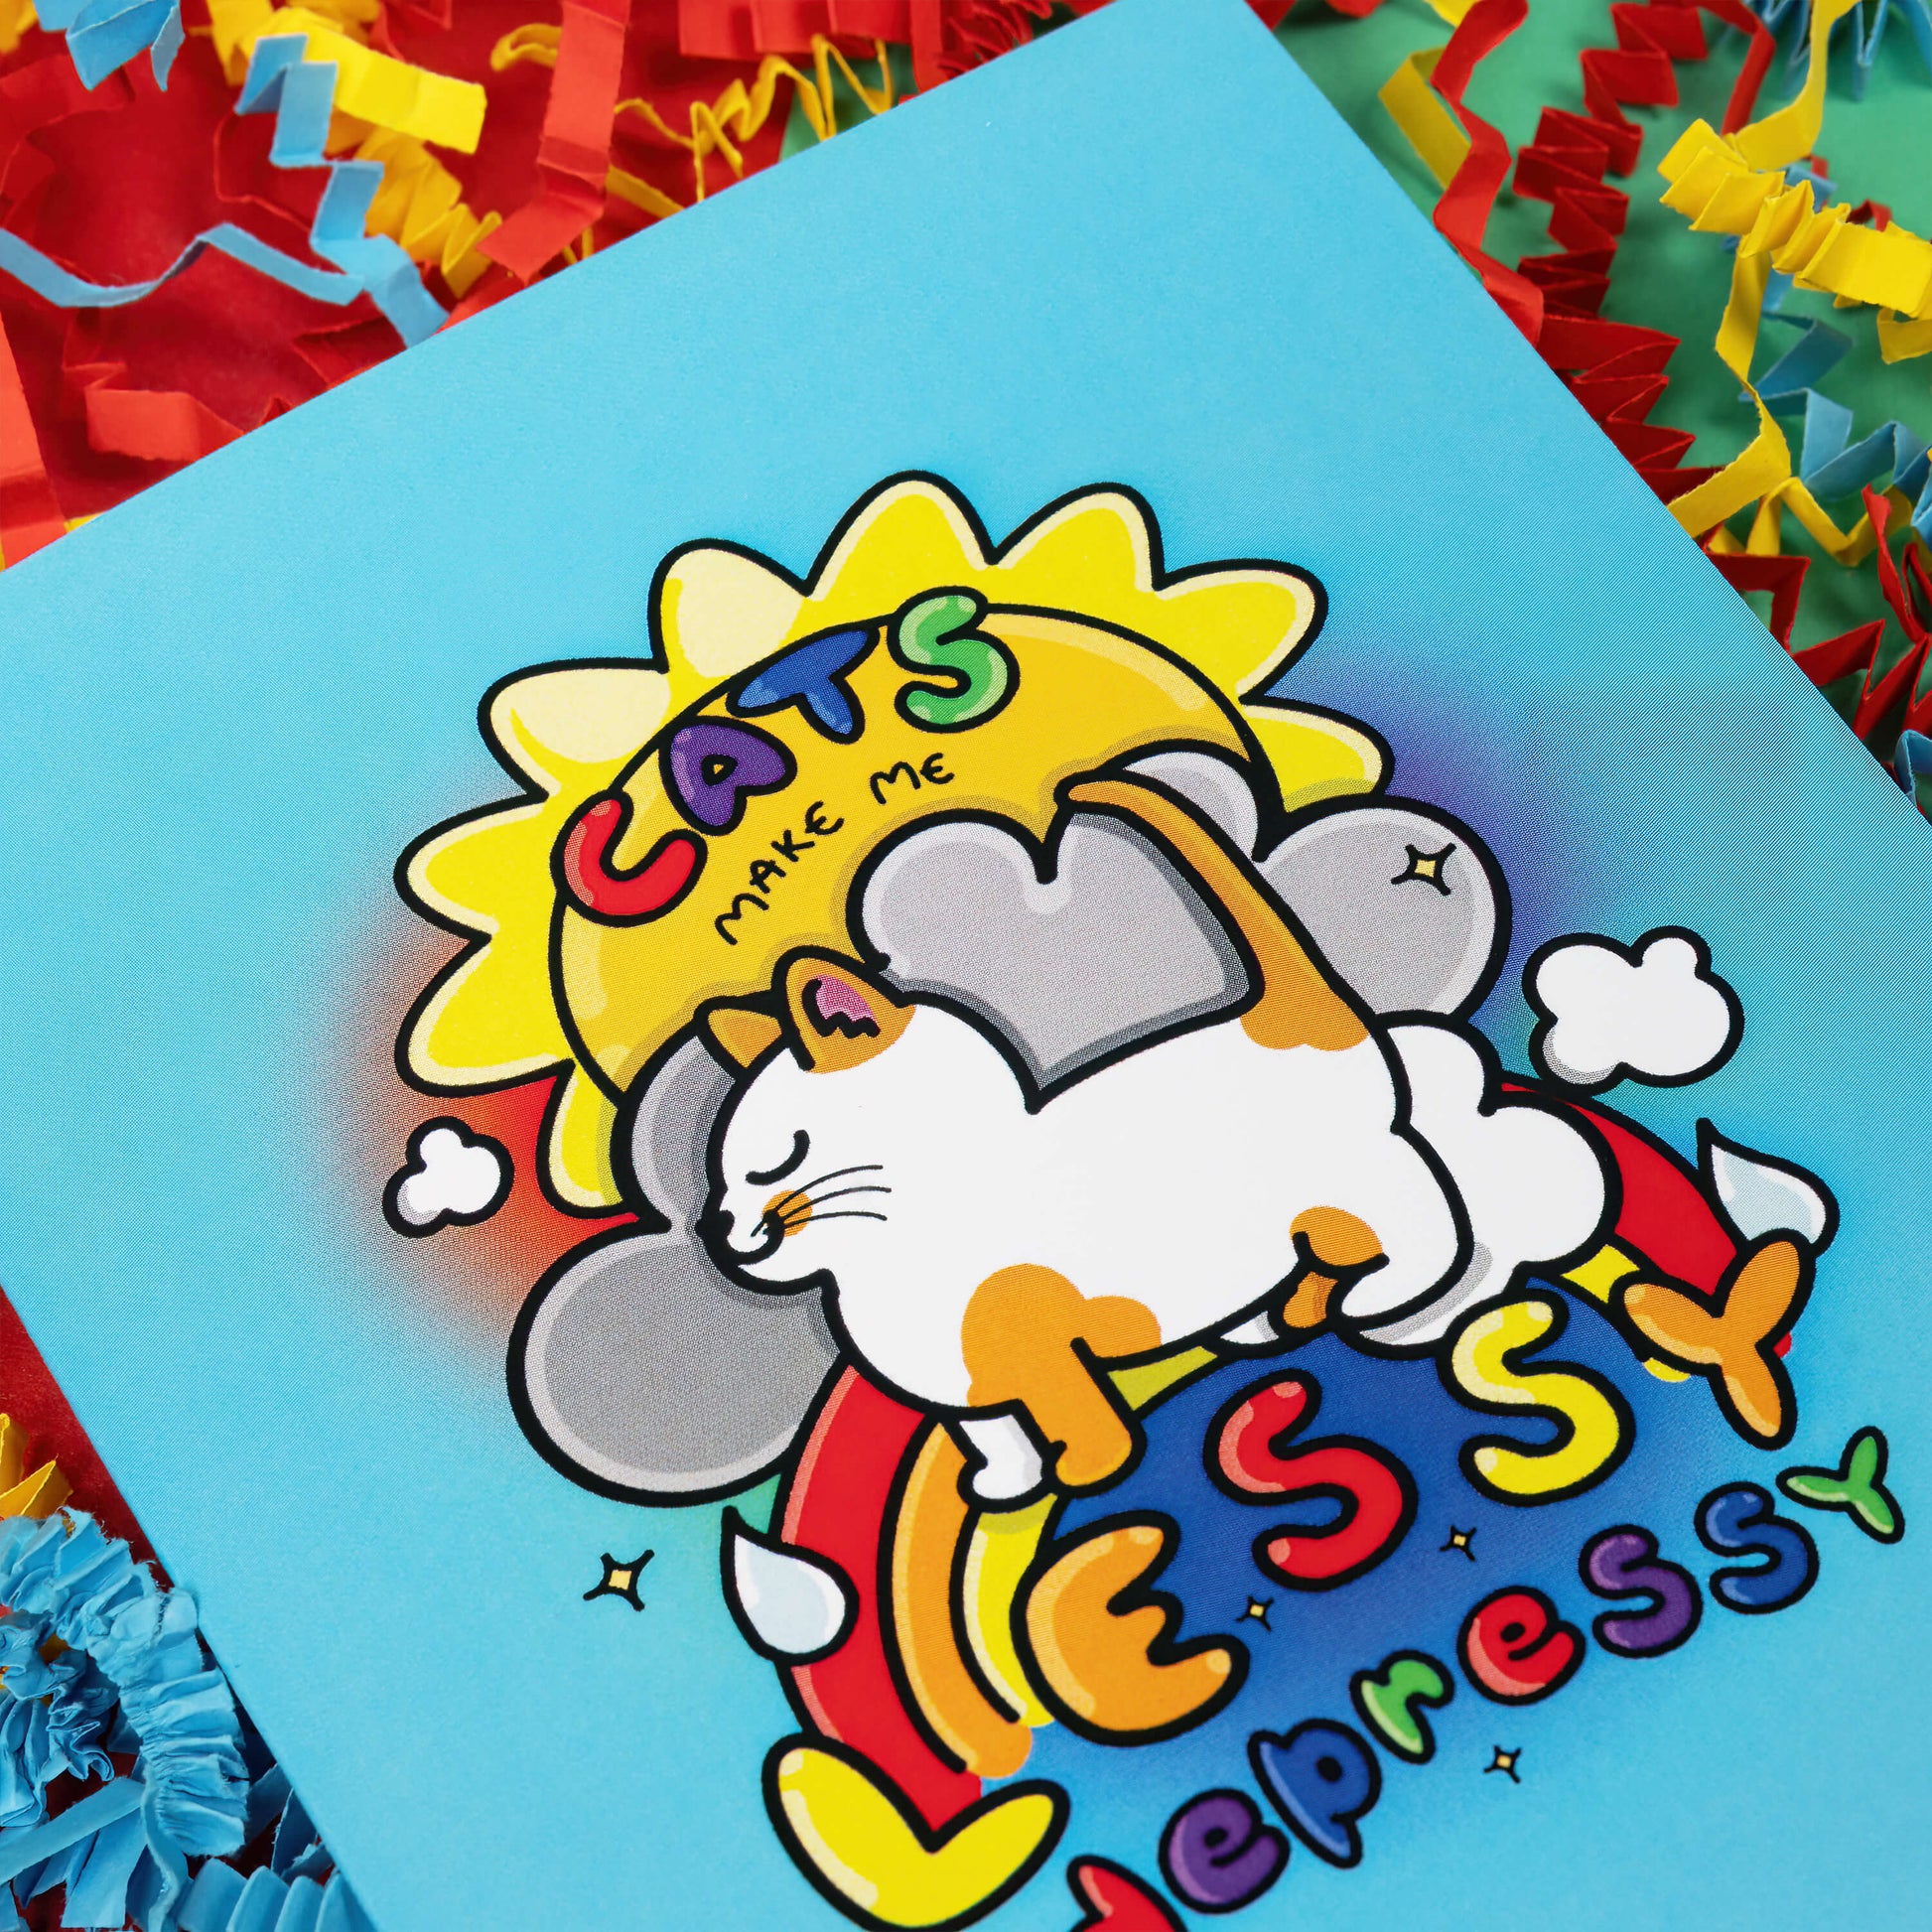 Close up of a light blue greeting card with an illustration of a happy ginger and white cat with a sun, clouds and rainbow behind it. 'Cats make me lessy depressy' is written on the card in rainbow bubble writing. The background of the photo is red, blue and yellow crinkle card confetti.